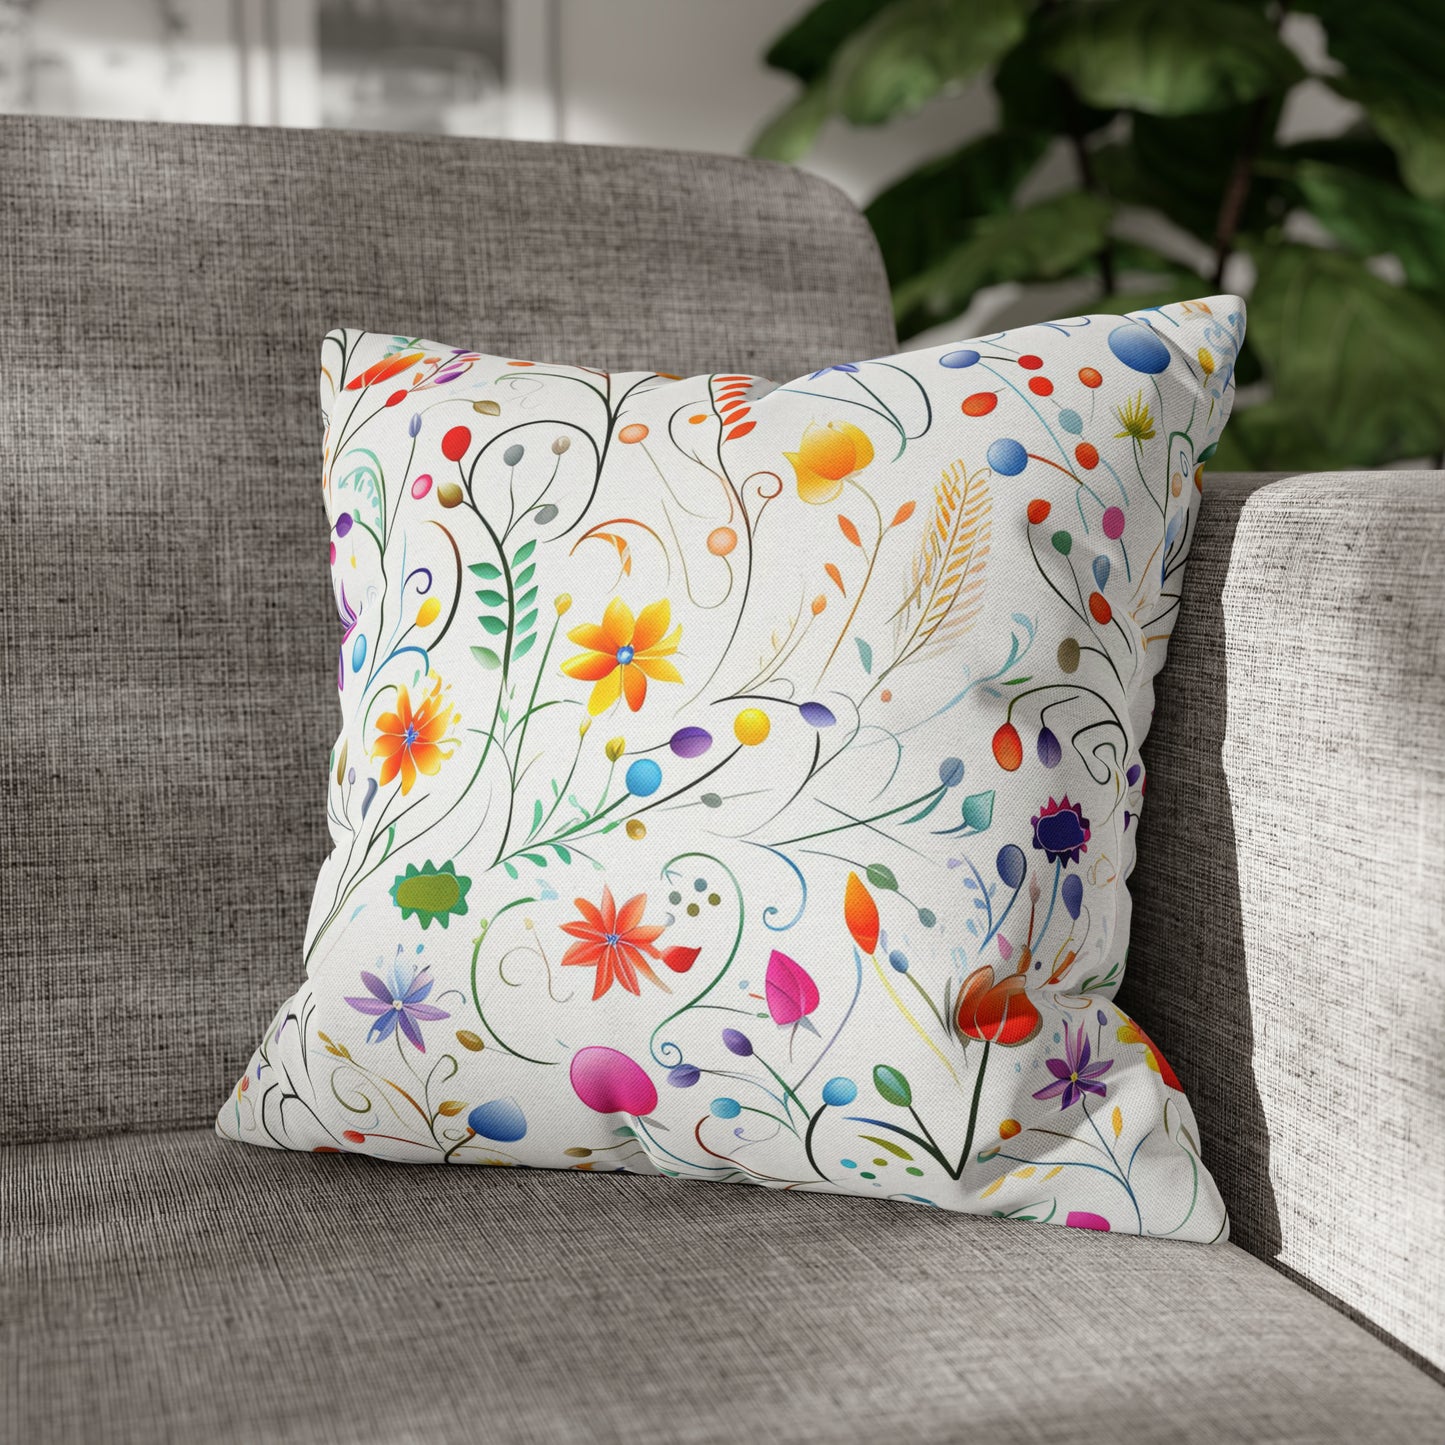 Fanciful Flower Fiesta Square Pillow Case